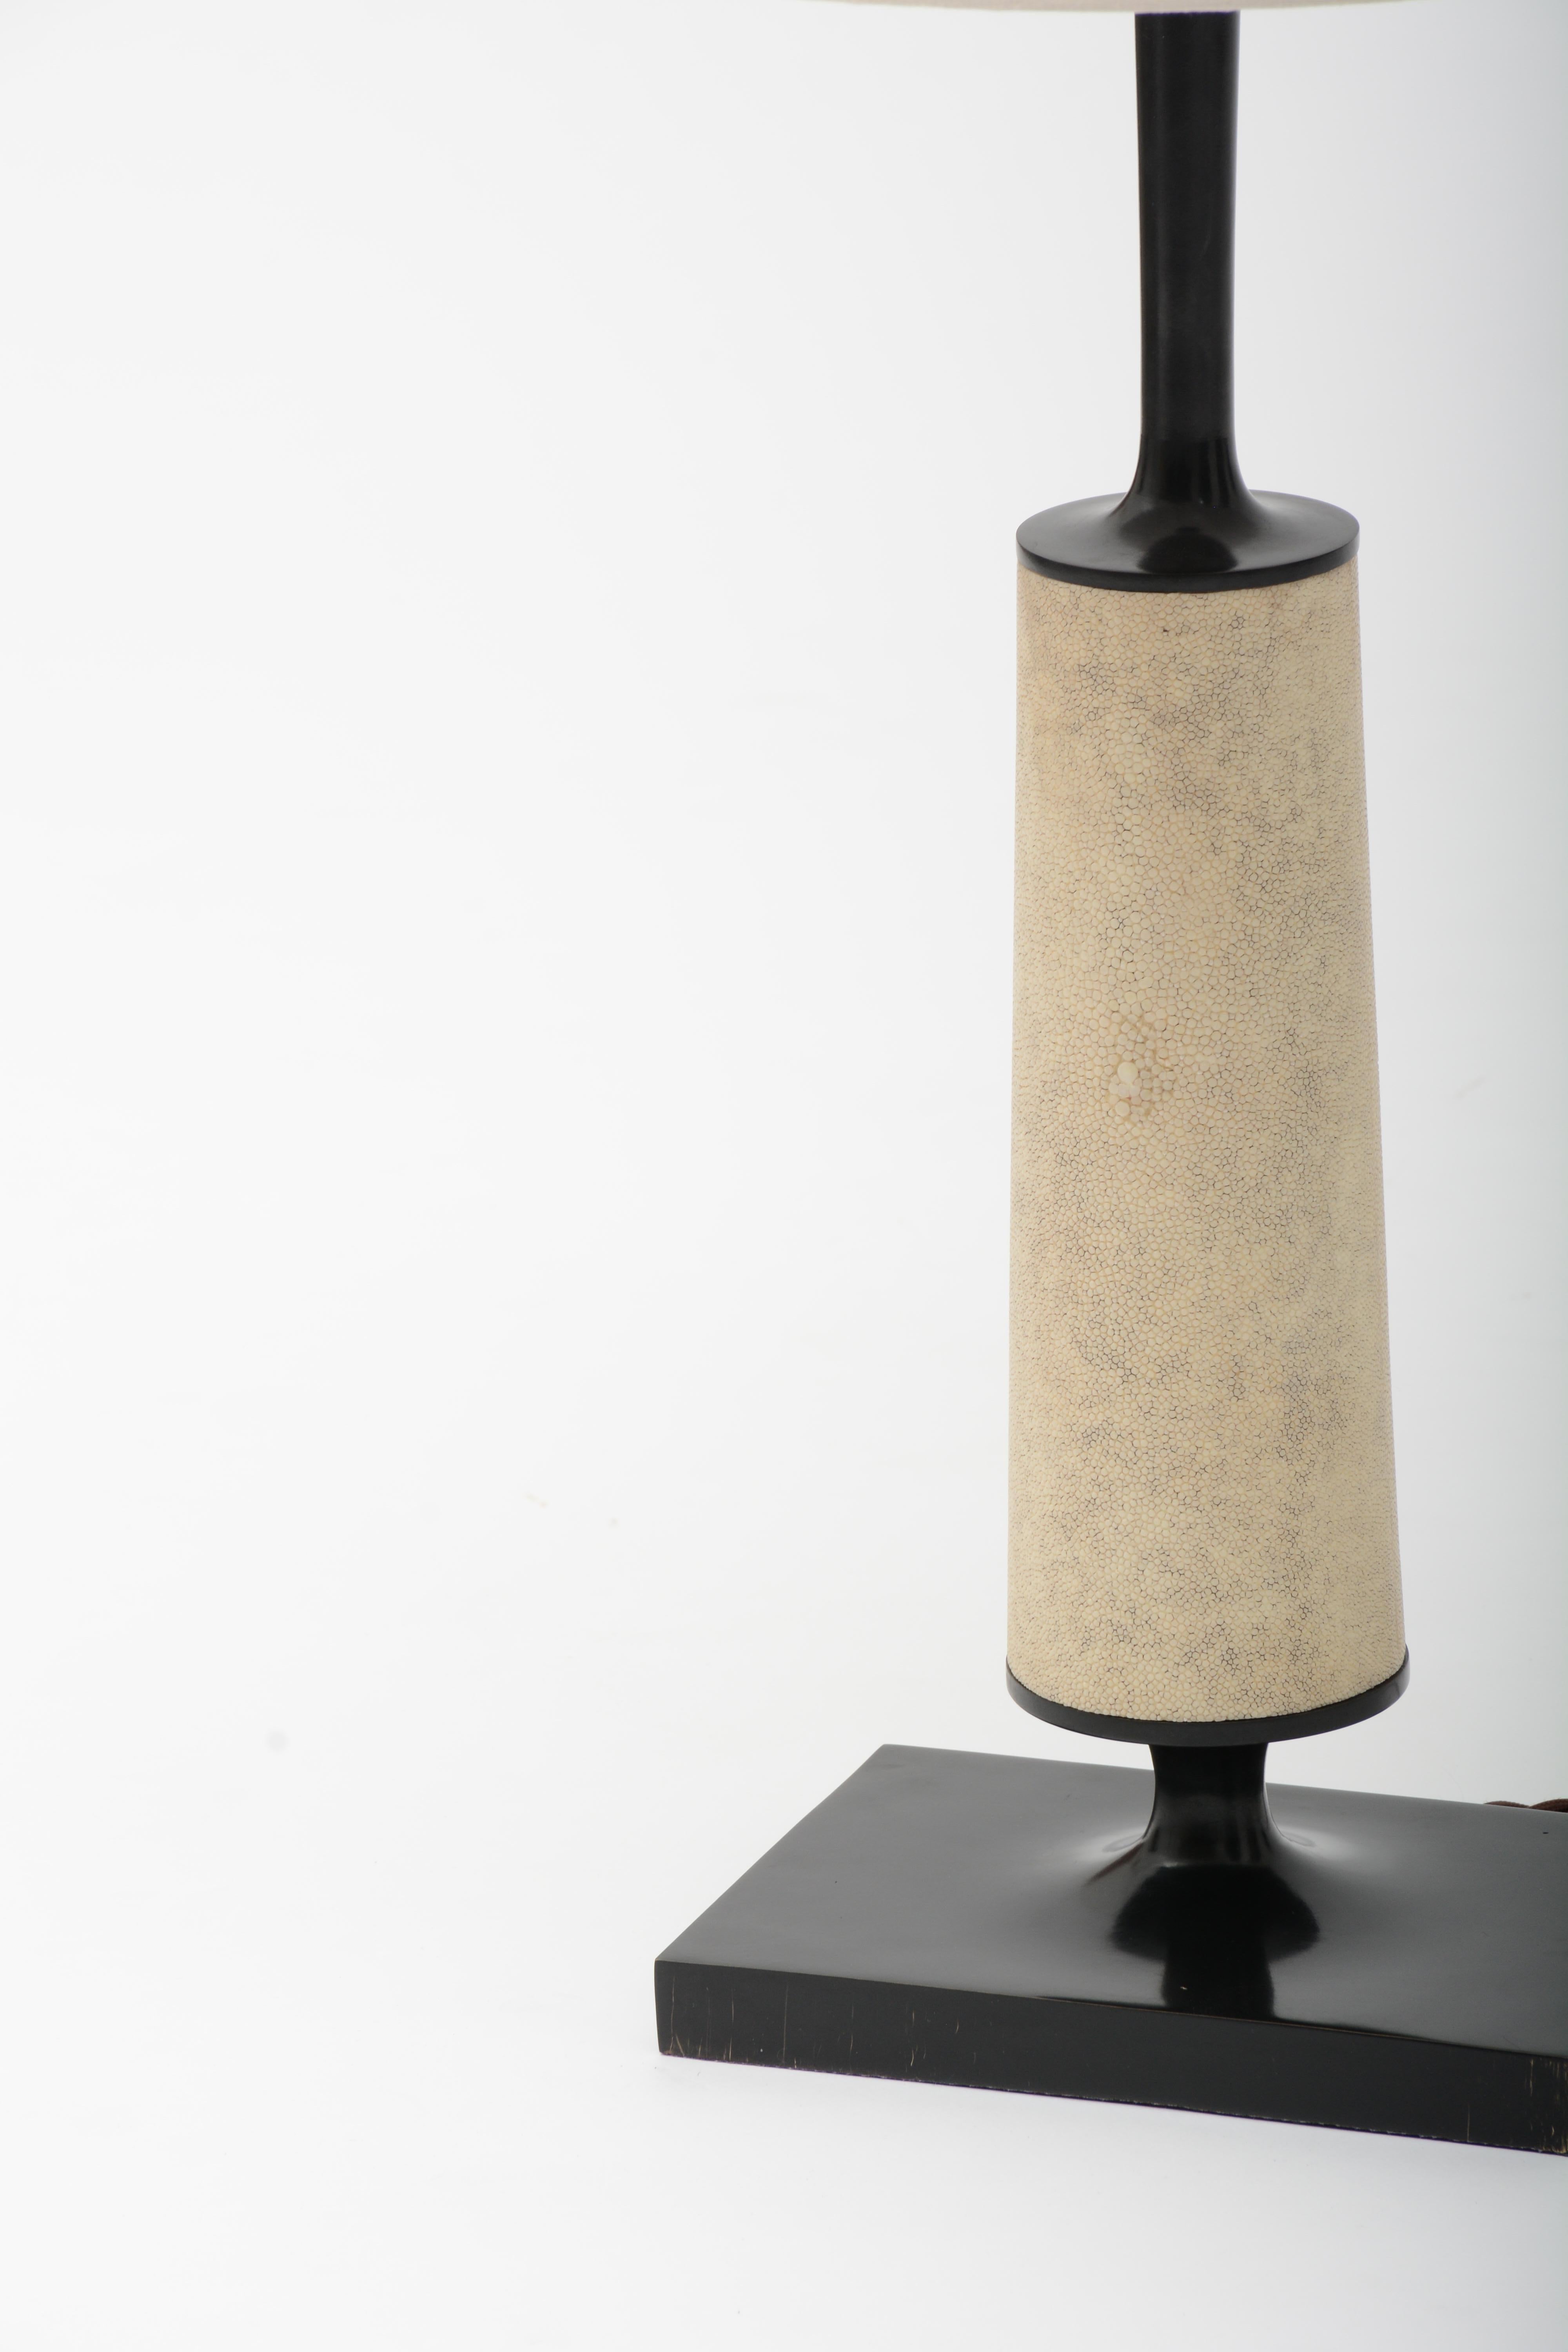 European Jaya Table Lamp - Bronze and Shagreen Table Lamp by Elan Atelier For Sale